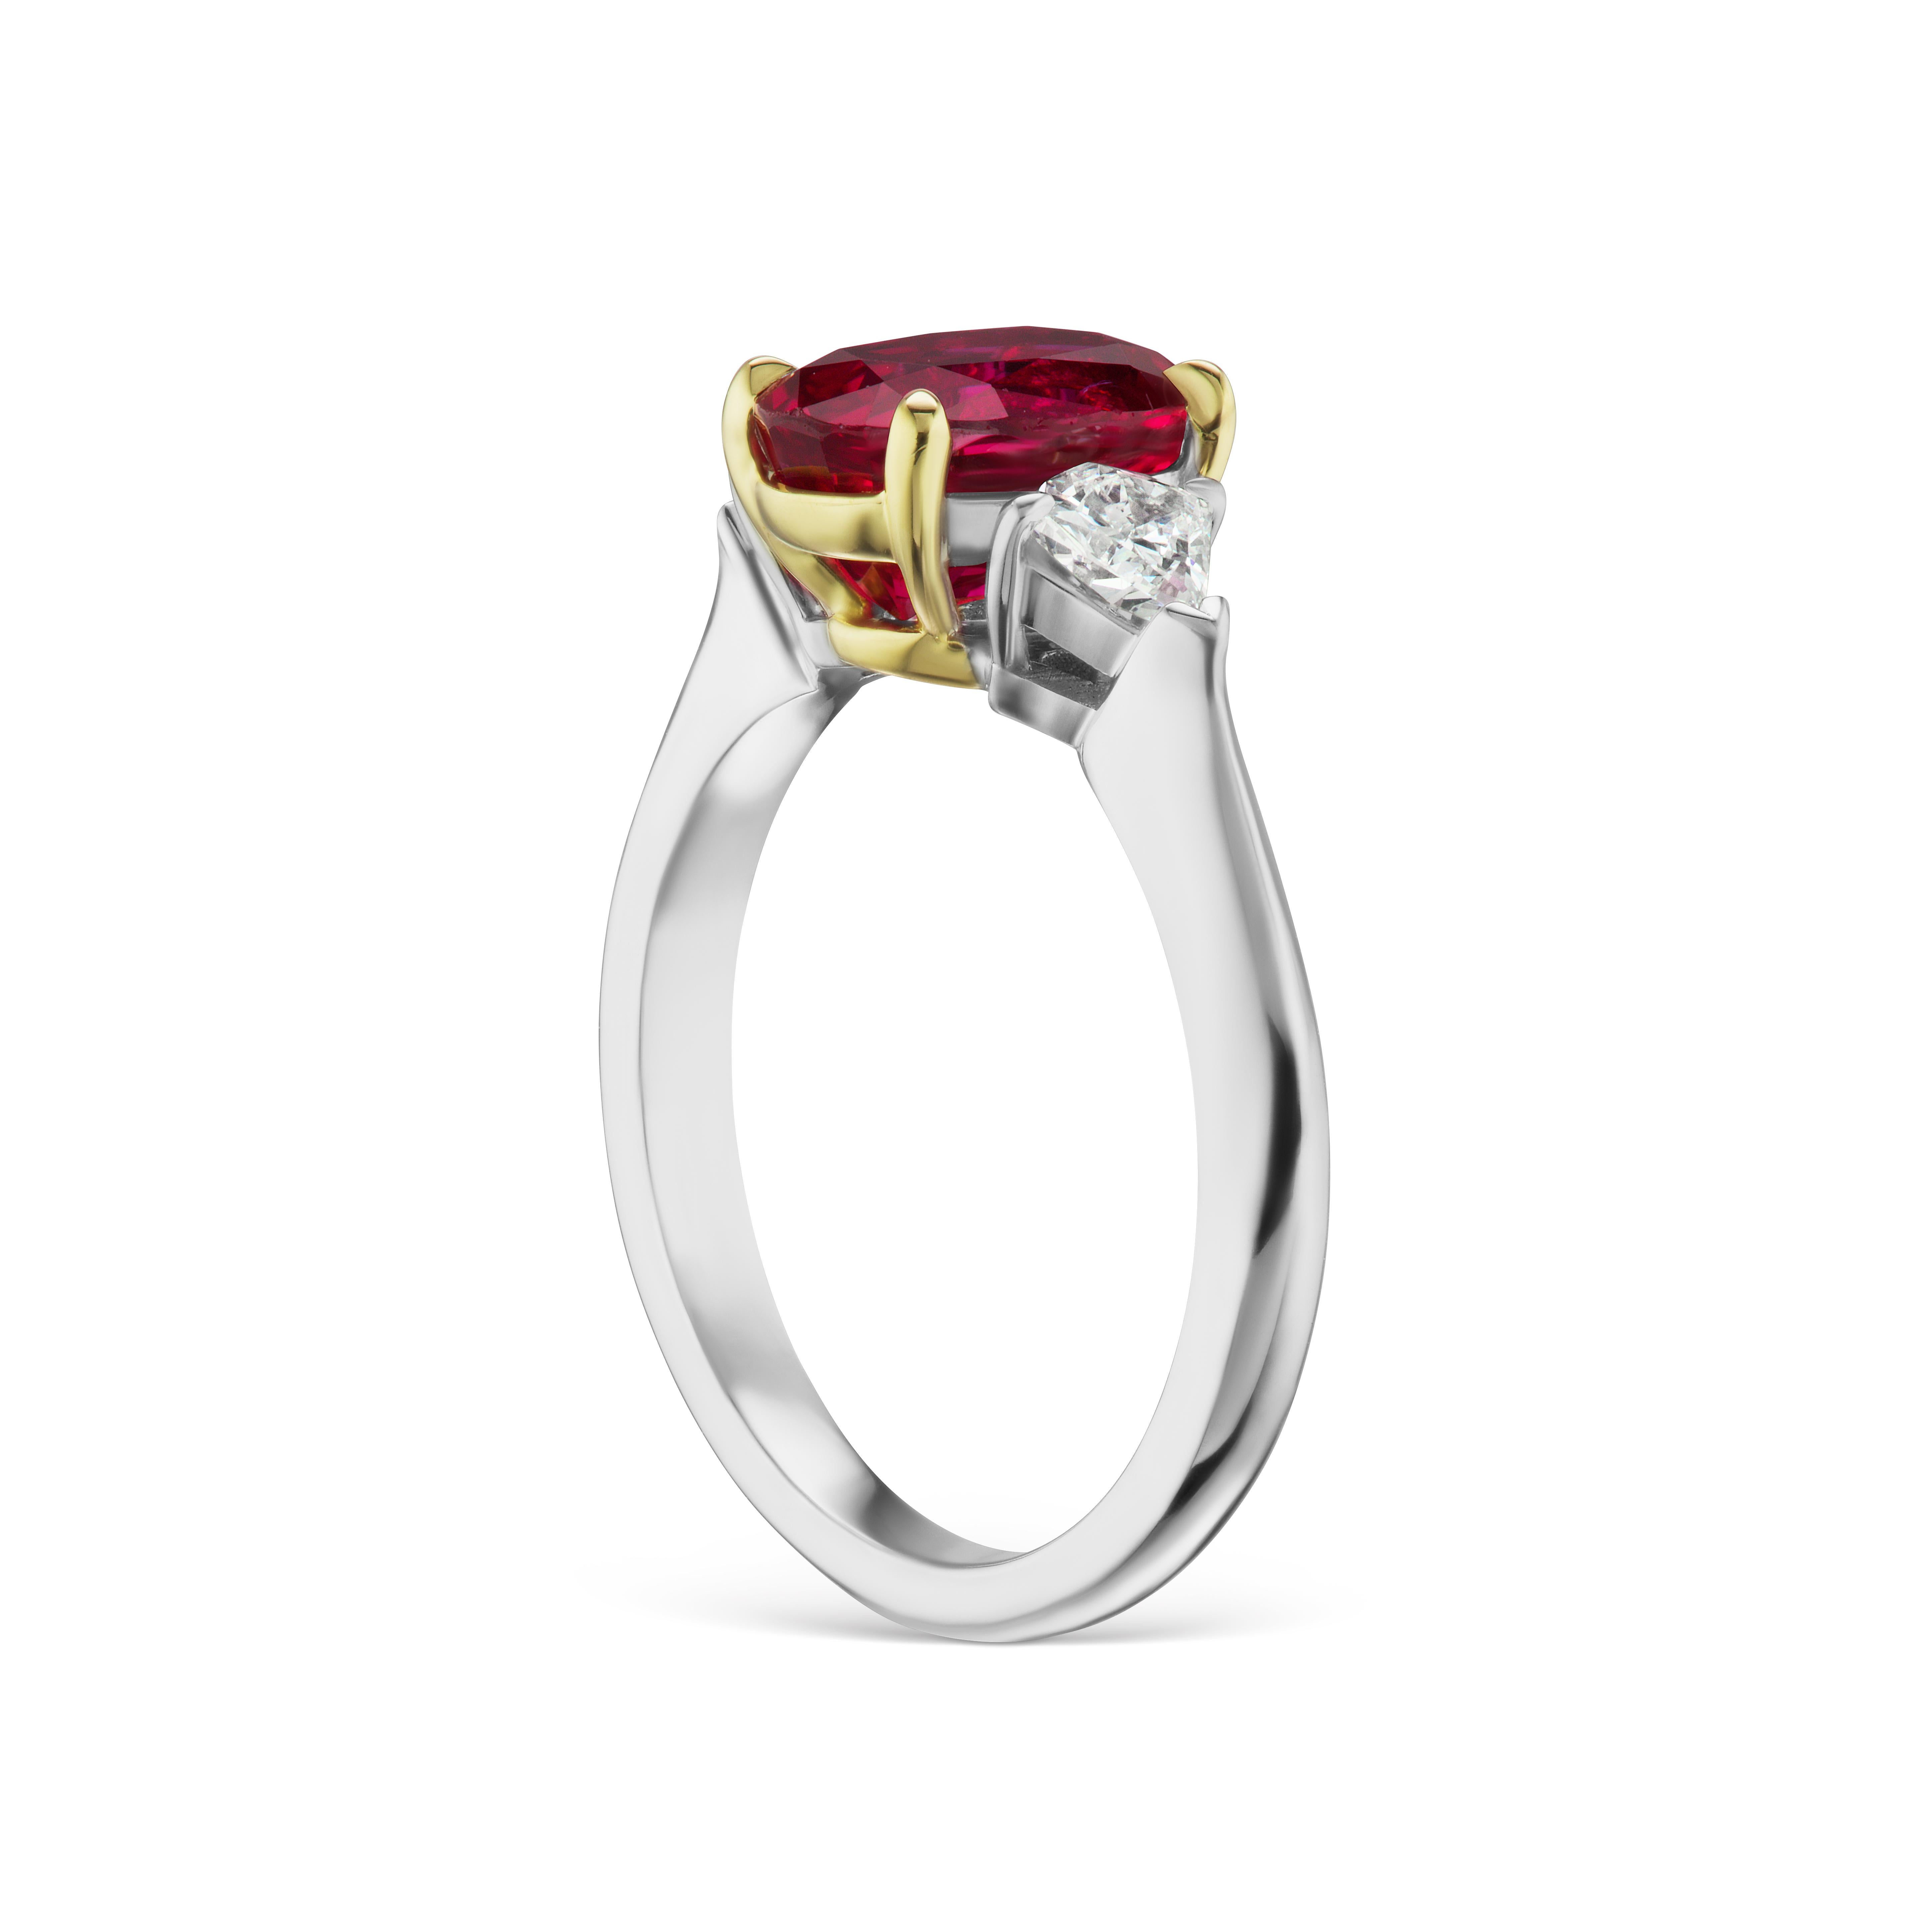 This stunning 2.49 Ct. GIA Certified Red Ruby is set in 14kt and 18kt with .50 ct. total weight of FVS Kite shaped side diamonds. If you don't see something, say something! We would be happy to work with you to create your dream ring!